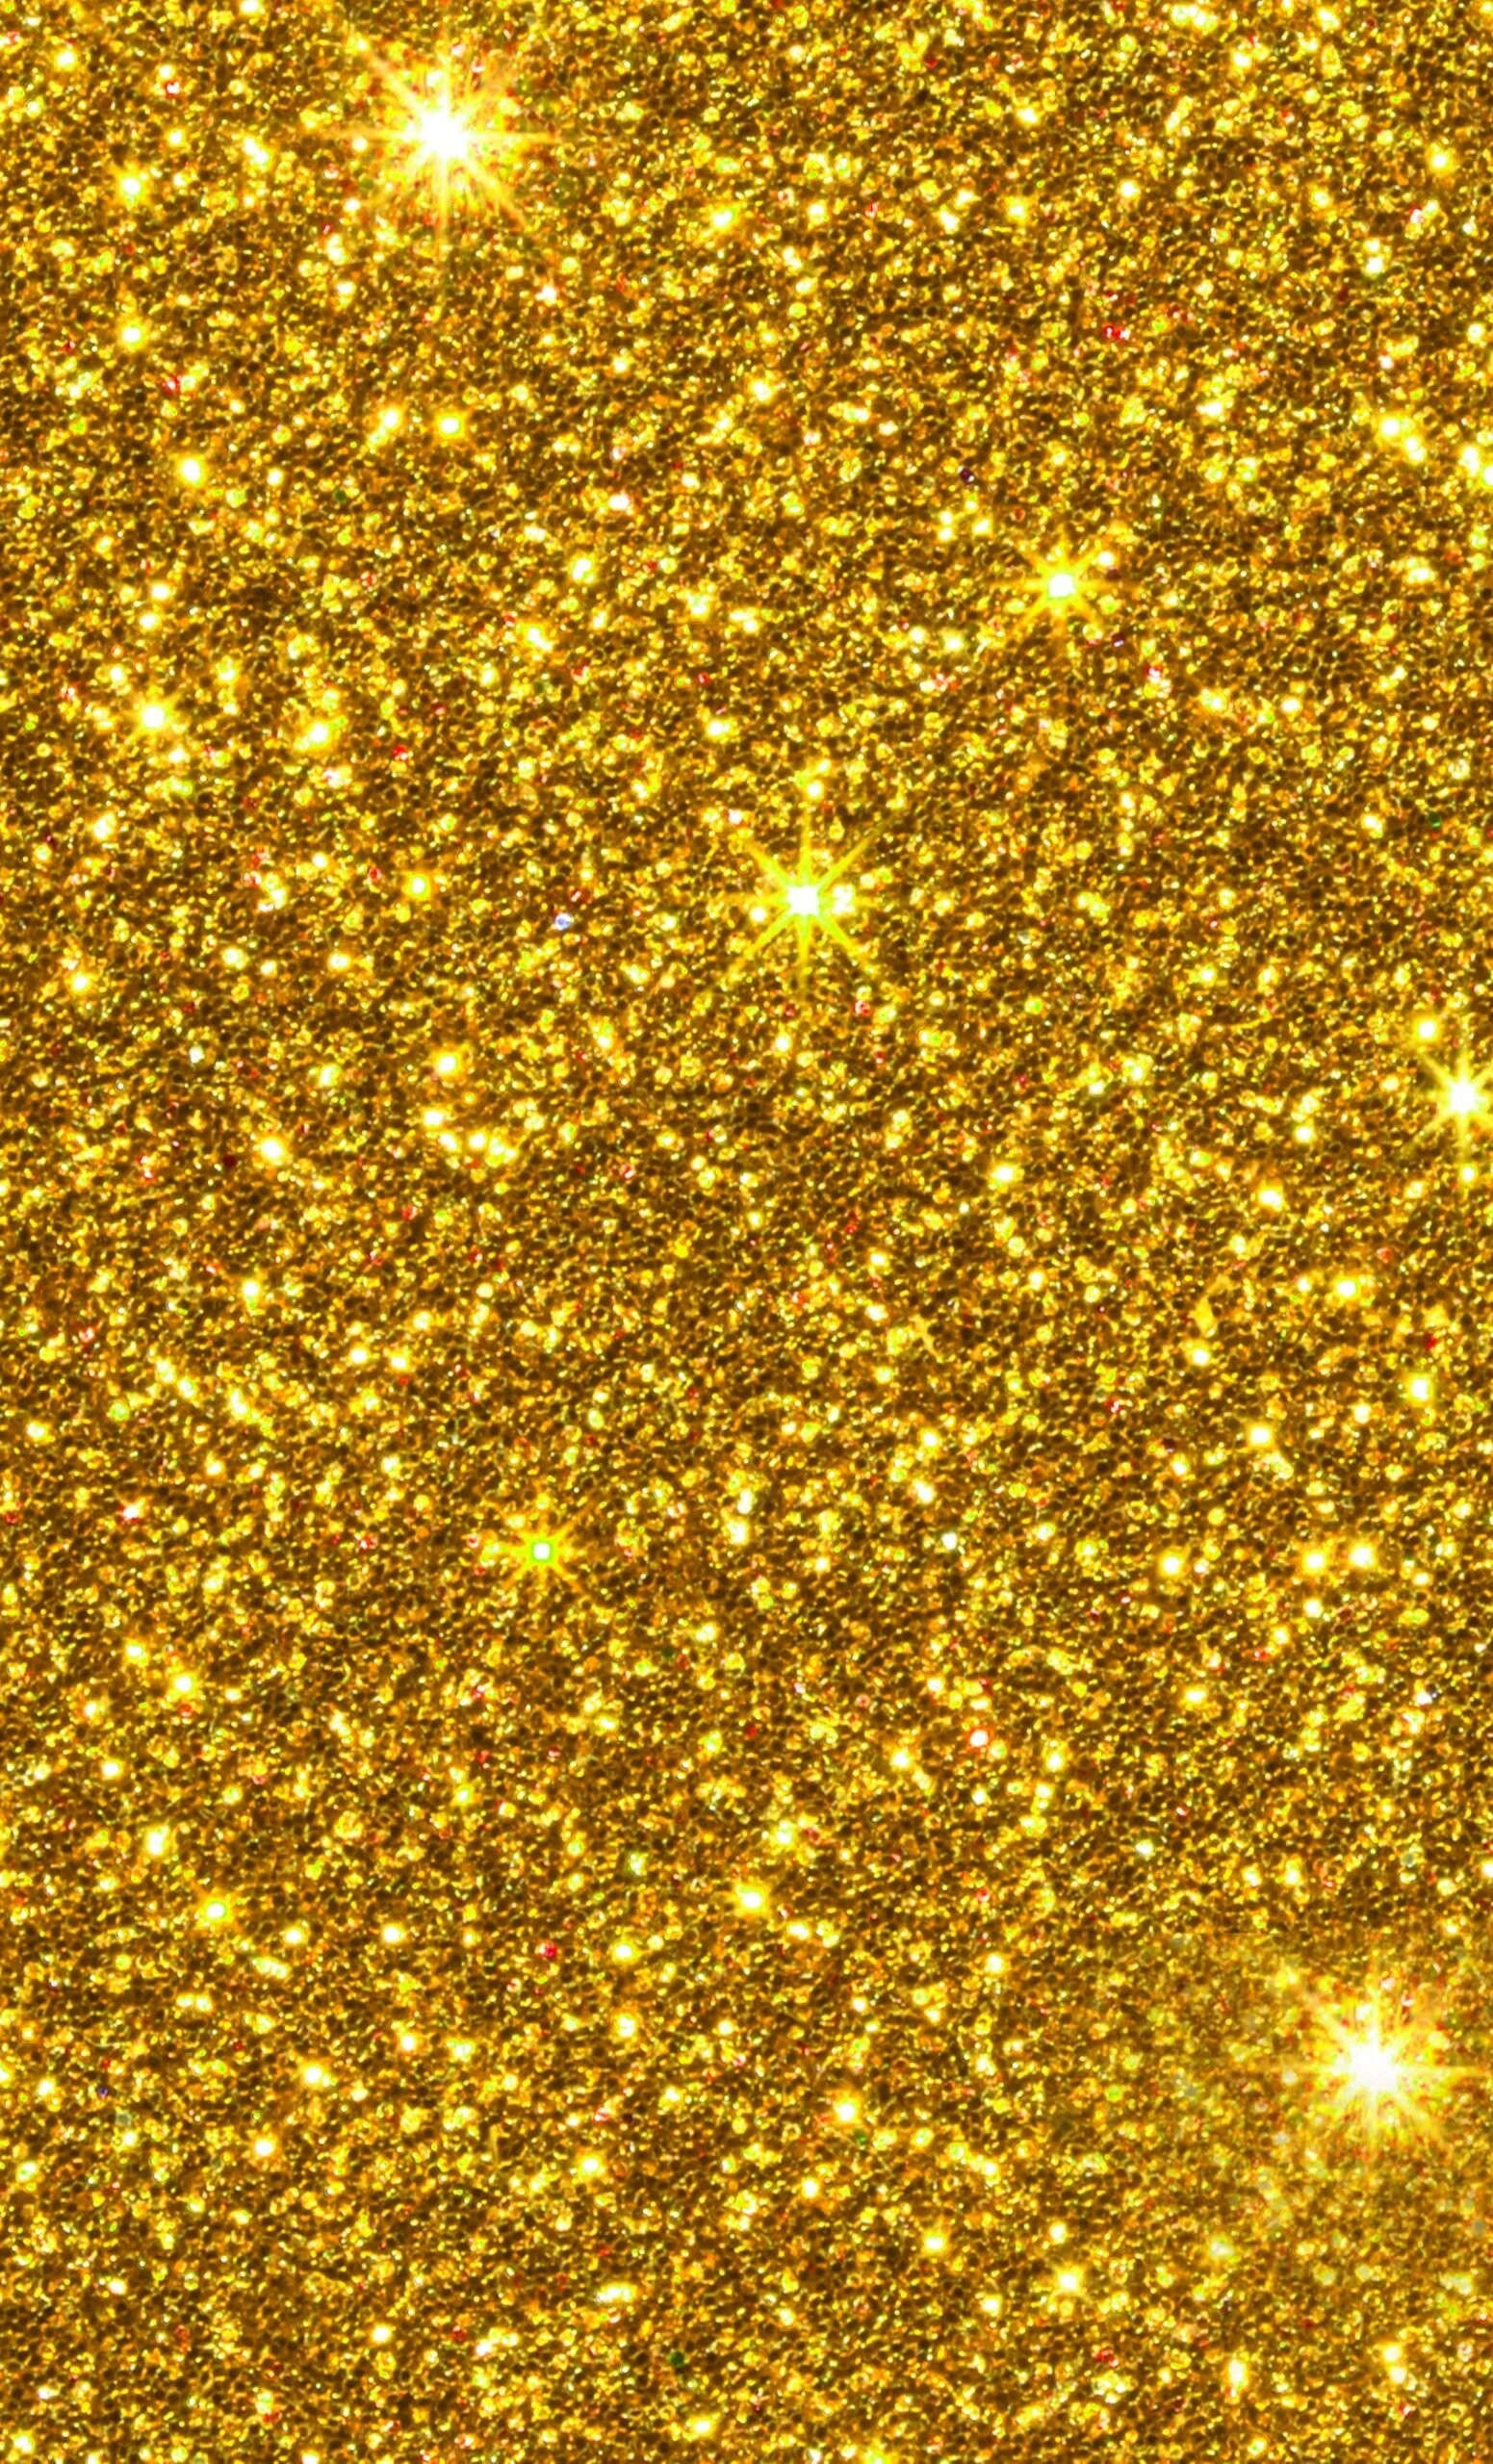 Gold Glitter: The shiny scales of a rare chemical element, Popular decoration tool. 1560x2560 HD Wallpaper.